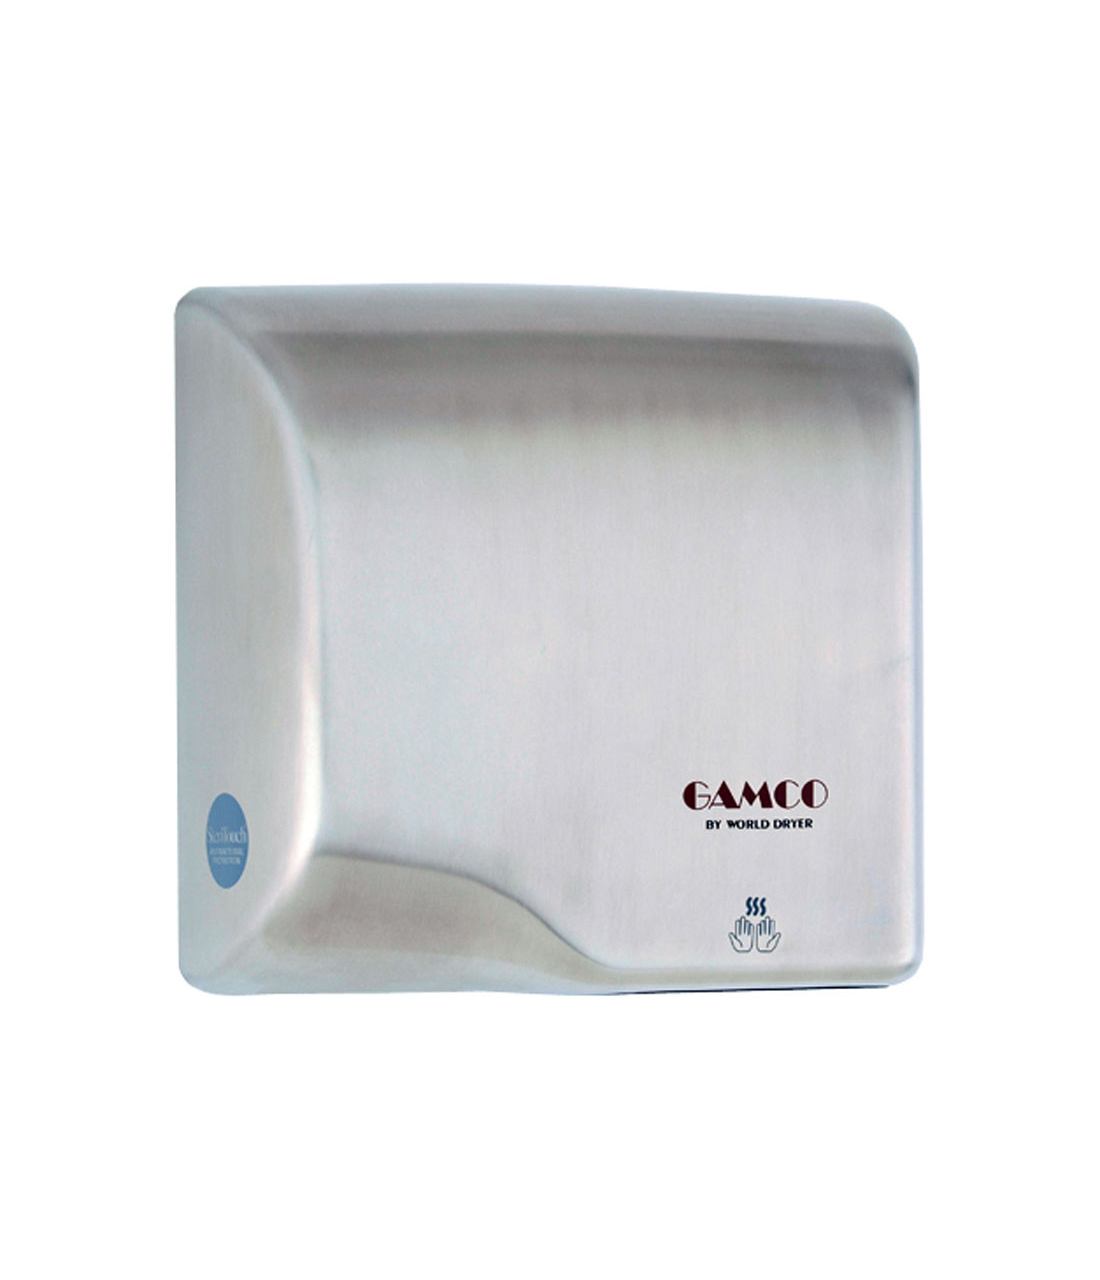 Surface-Mounted ADA Compliant Hand Dryer - (Model #: dr-5128) Image